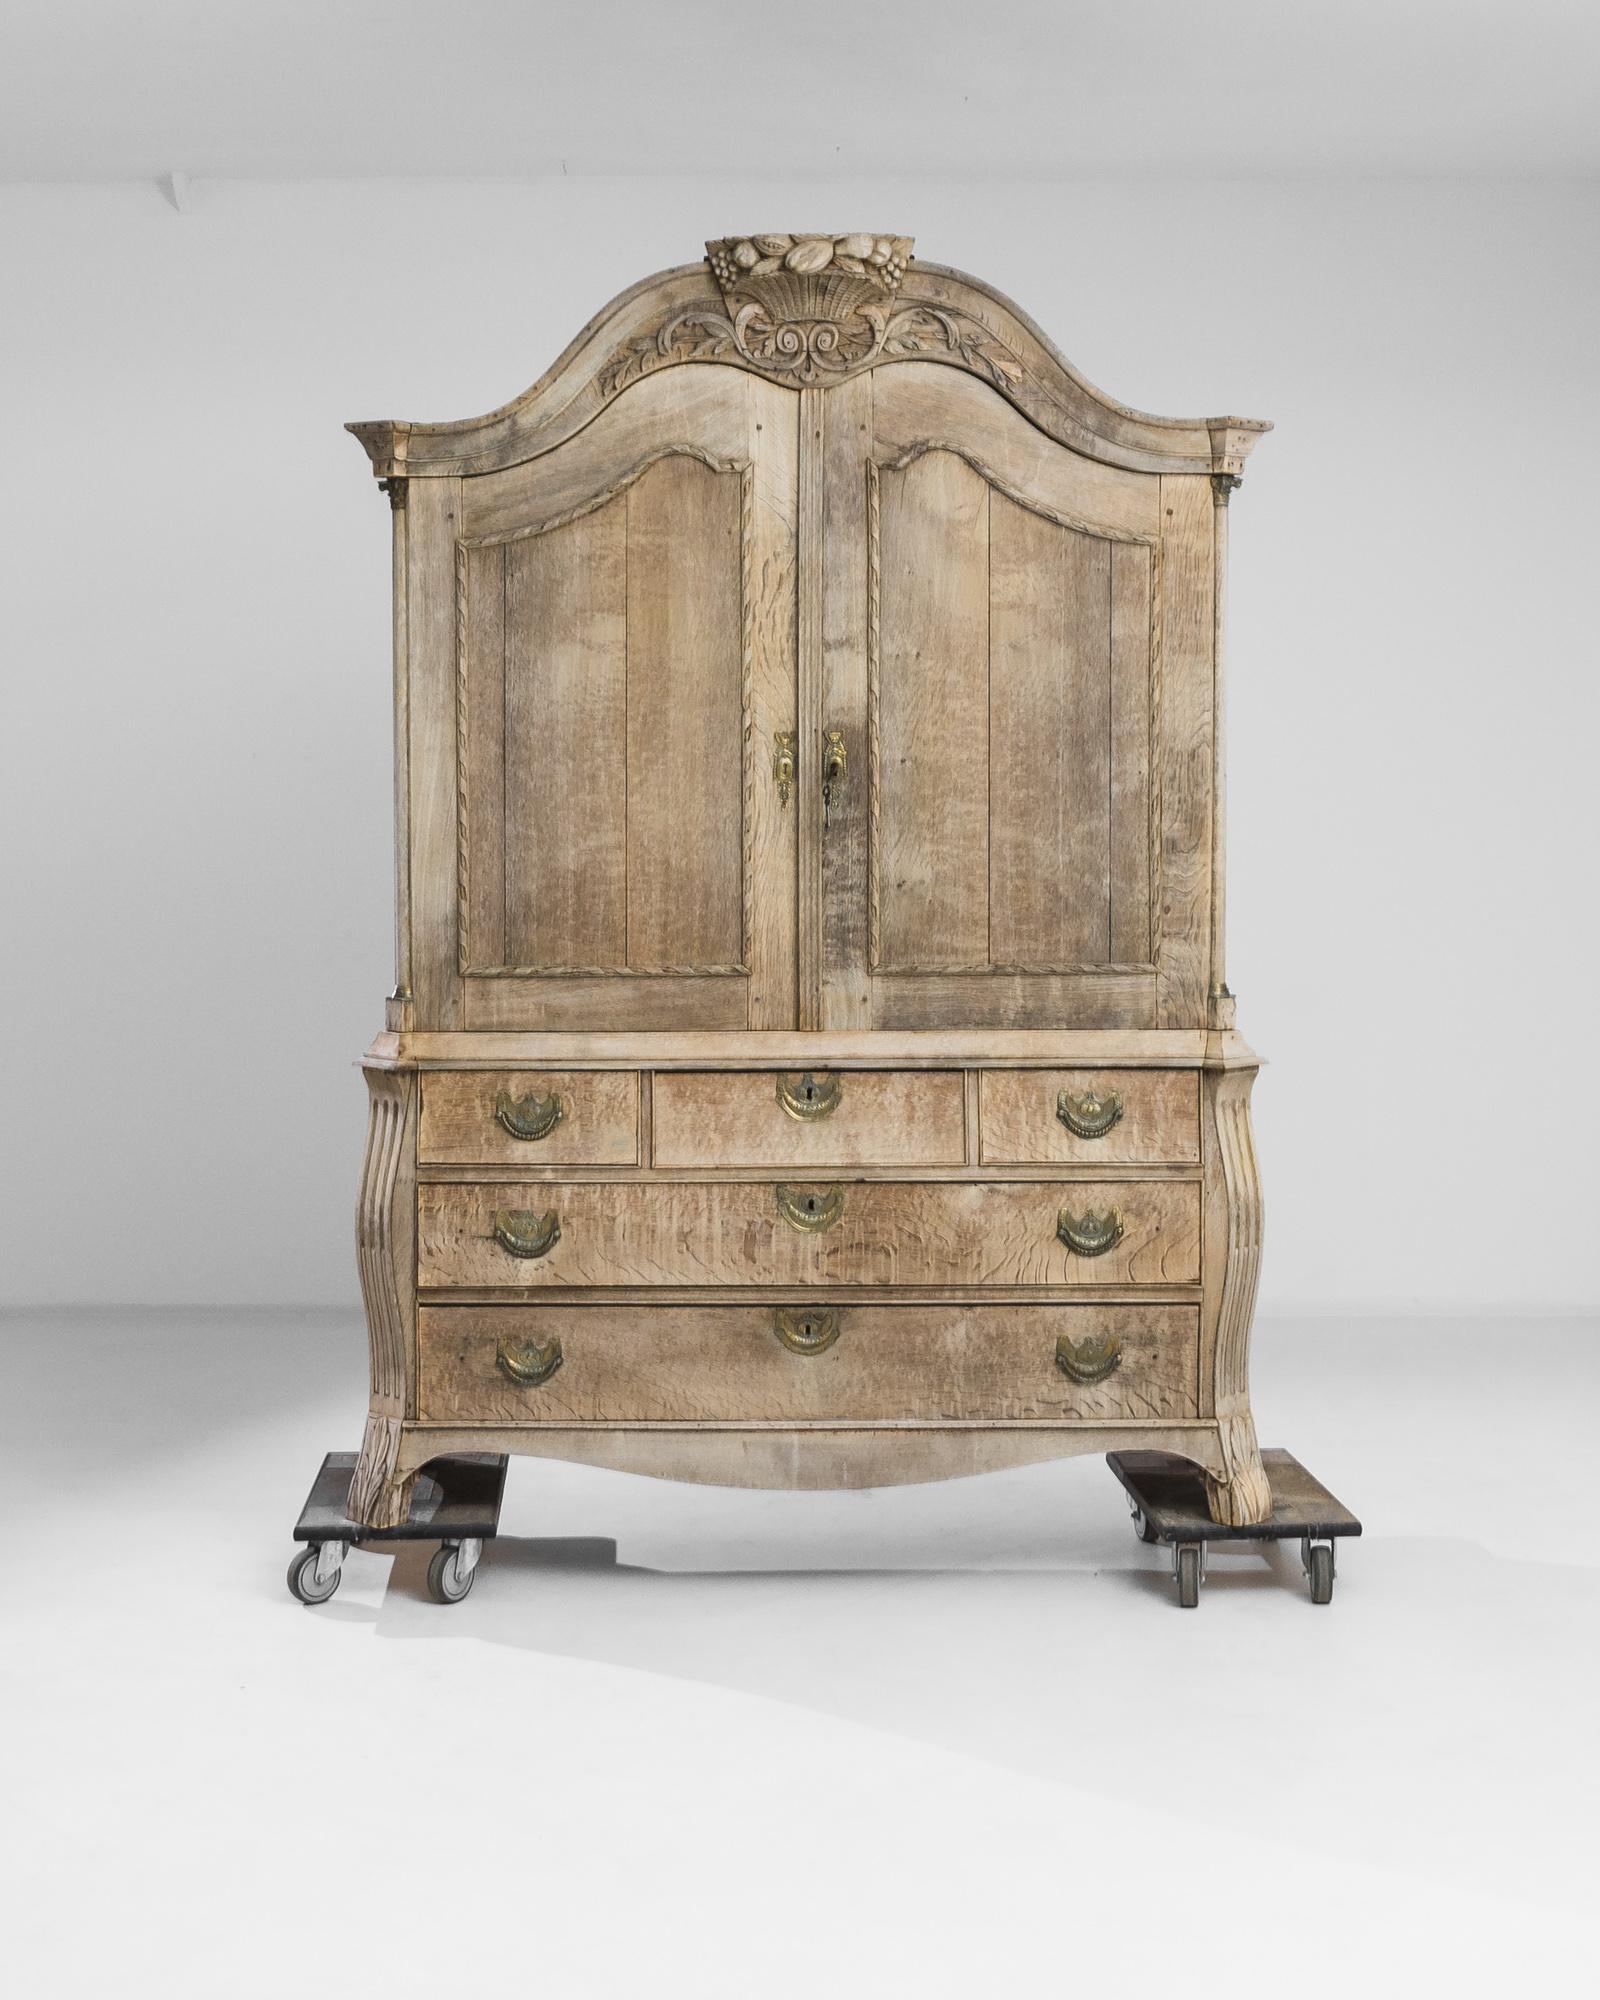 An 1780s Dutch bleached oak cabinet. This grand cabinet offers three sliding bottom drawers and a large top compartment fit with subsequent, smaller drawer pulls. A scrupulously hand-carved detail of a cornucopia sits atop it, while roman motifs